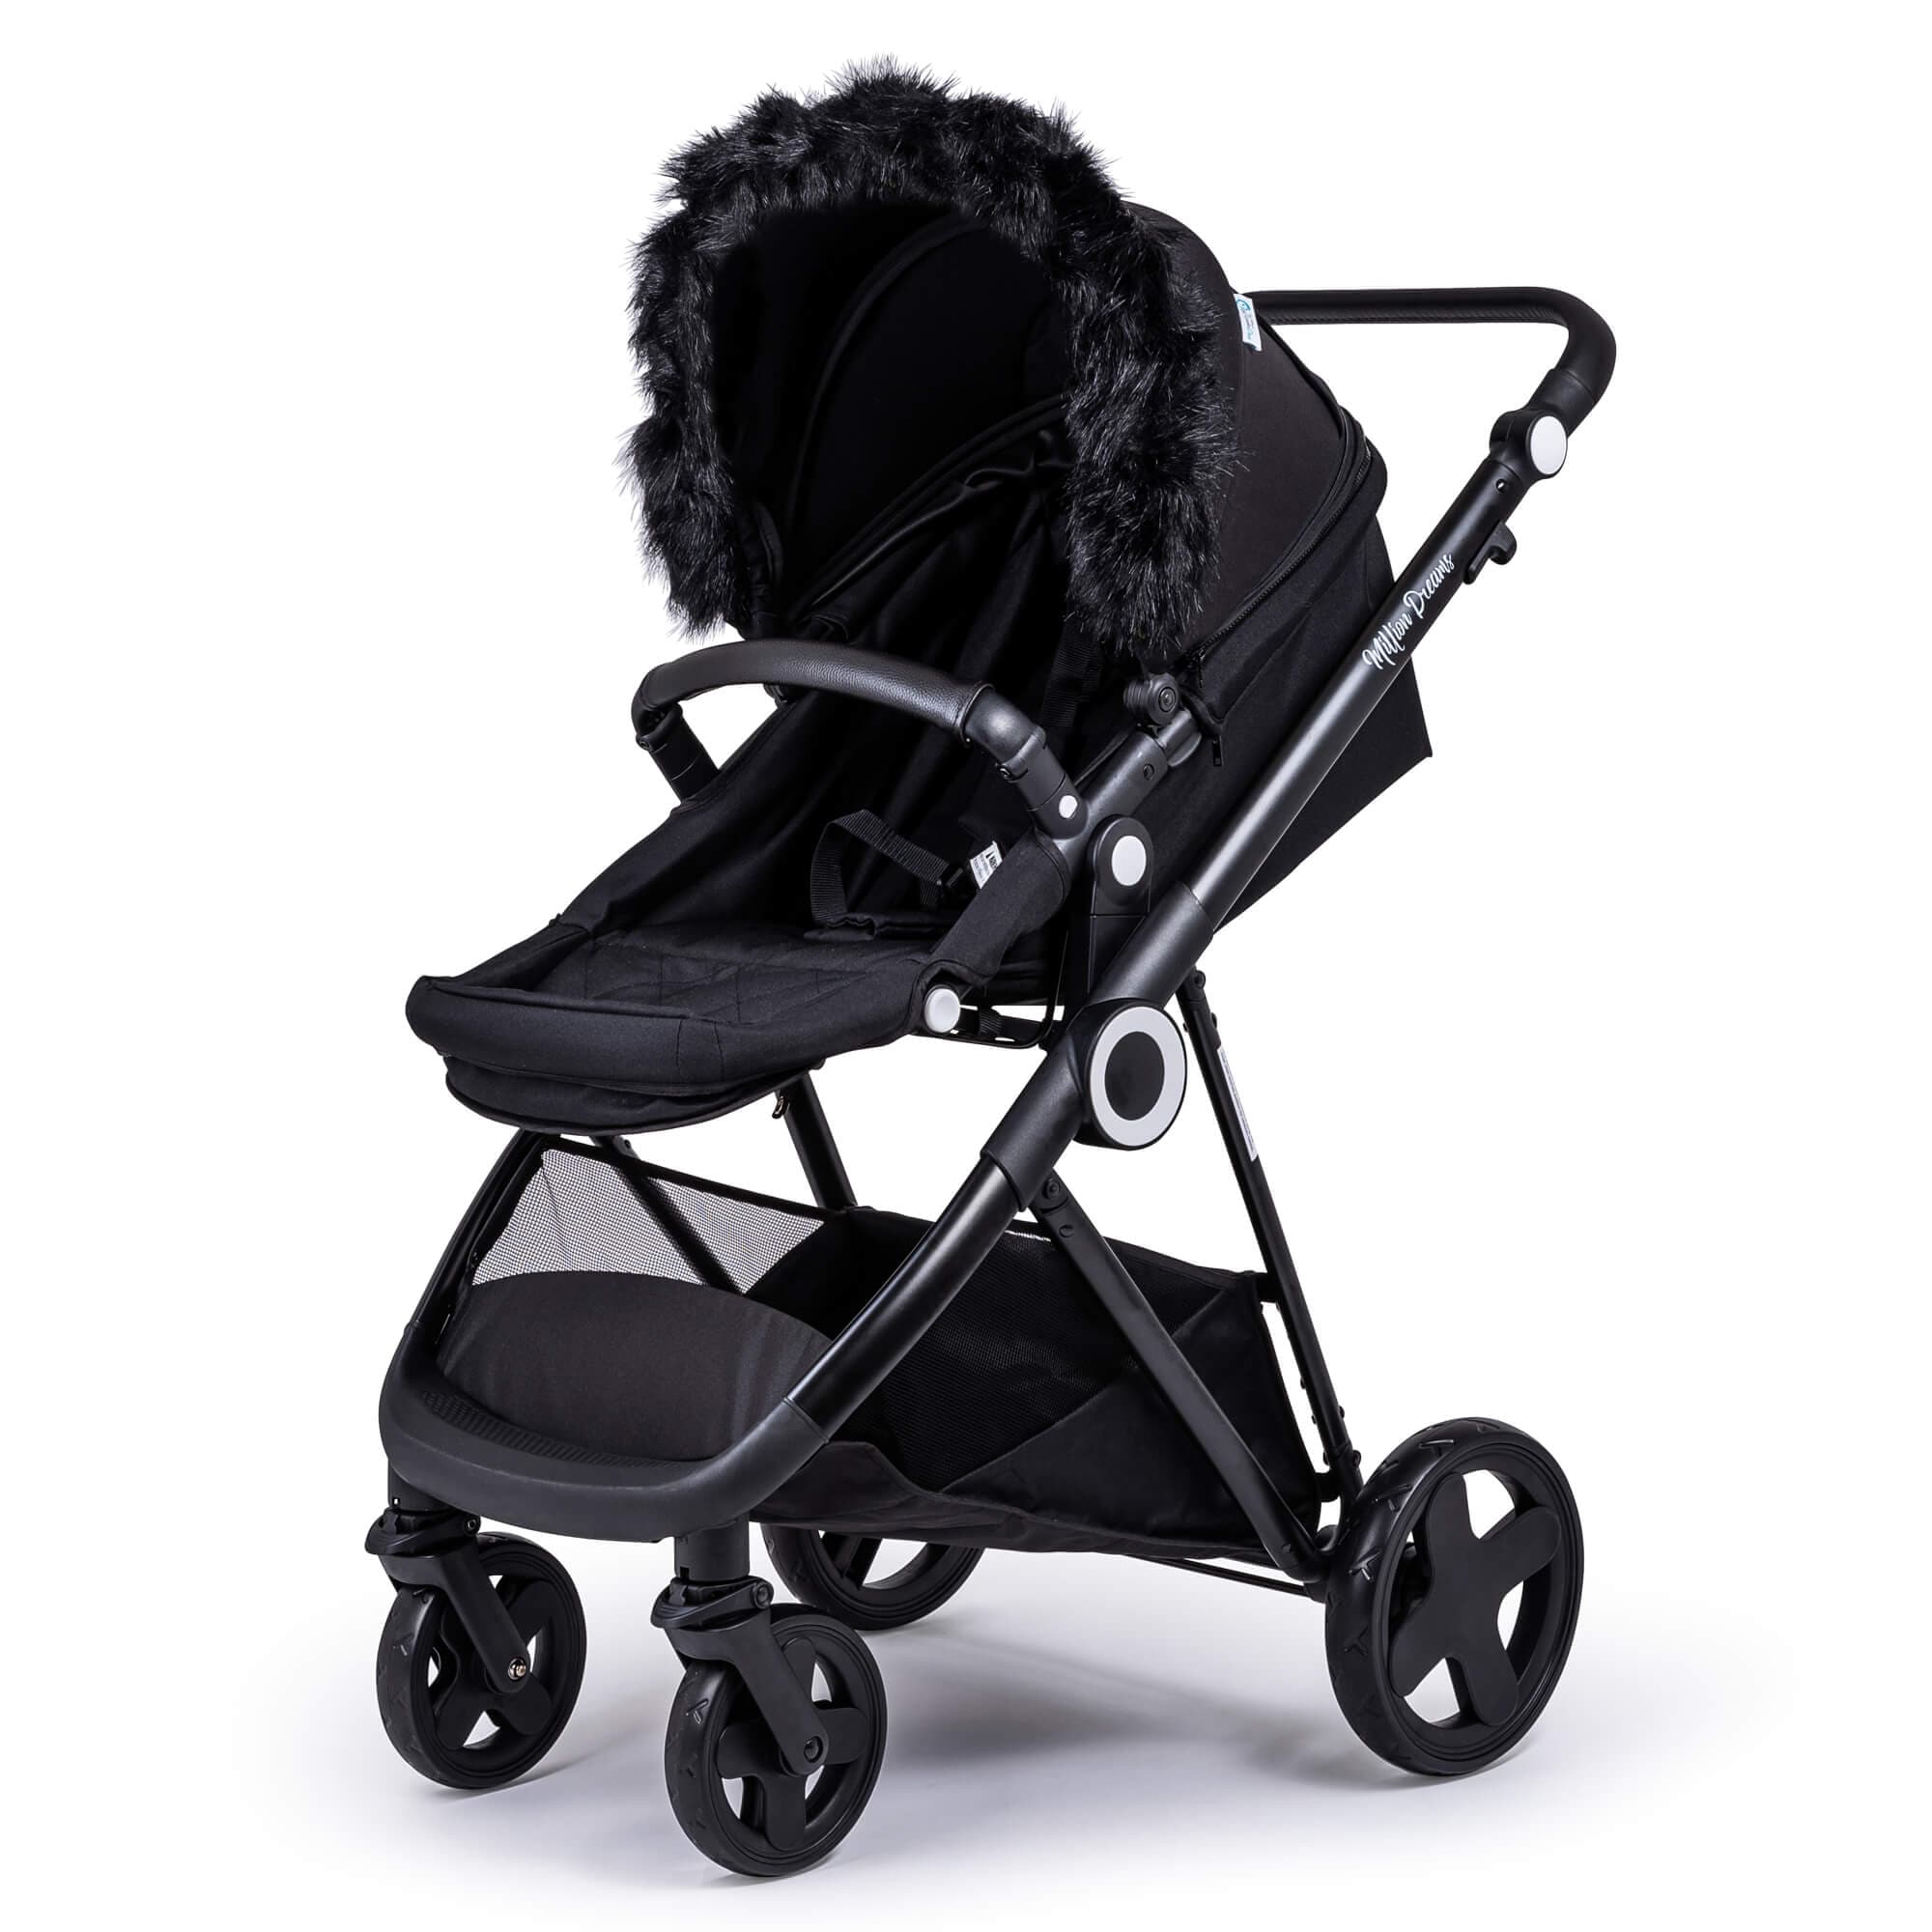 Pram Fur Hood Trim Attachment for Pushchair Compatible with Urban Detour - For Your Little One